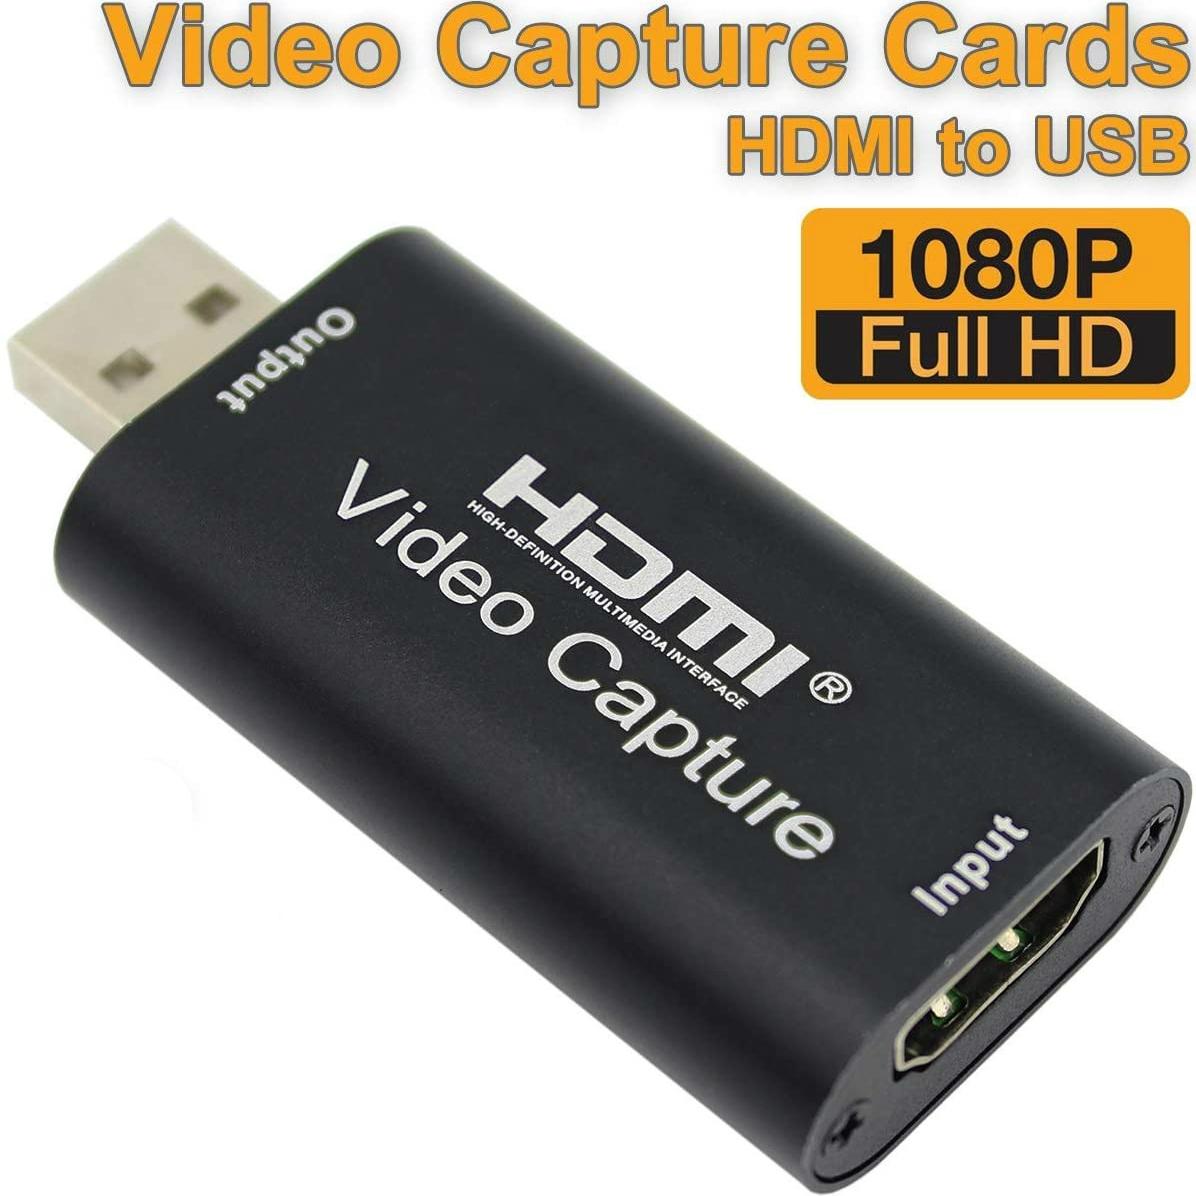 TodayDeal Audio Video Capture Cards HDMI to USB 1080p USB2.0 Record via DSLR Camcorder Action Cam